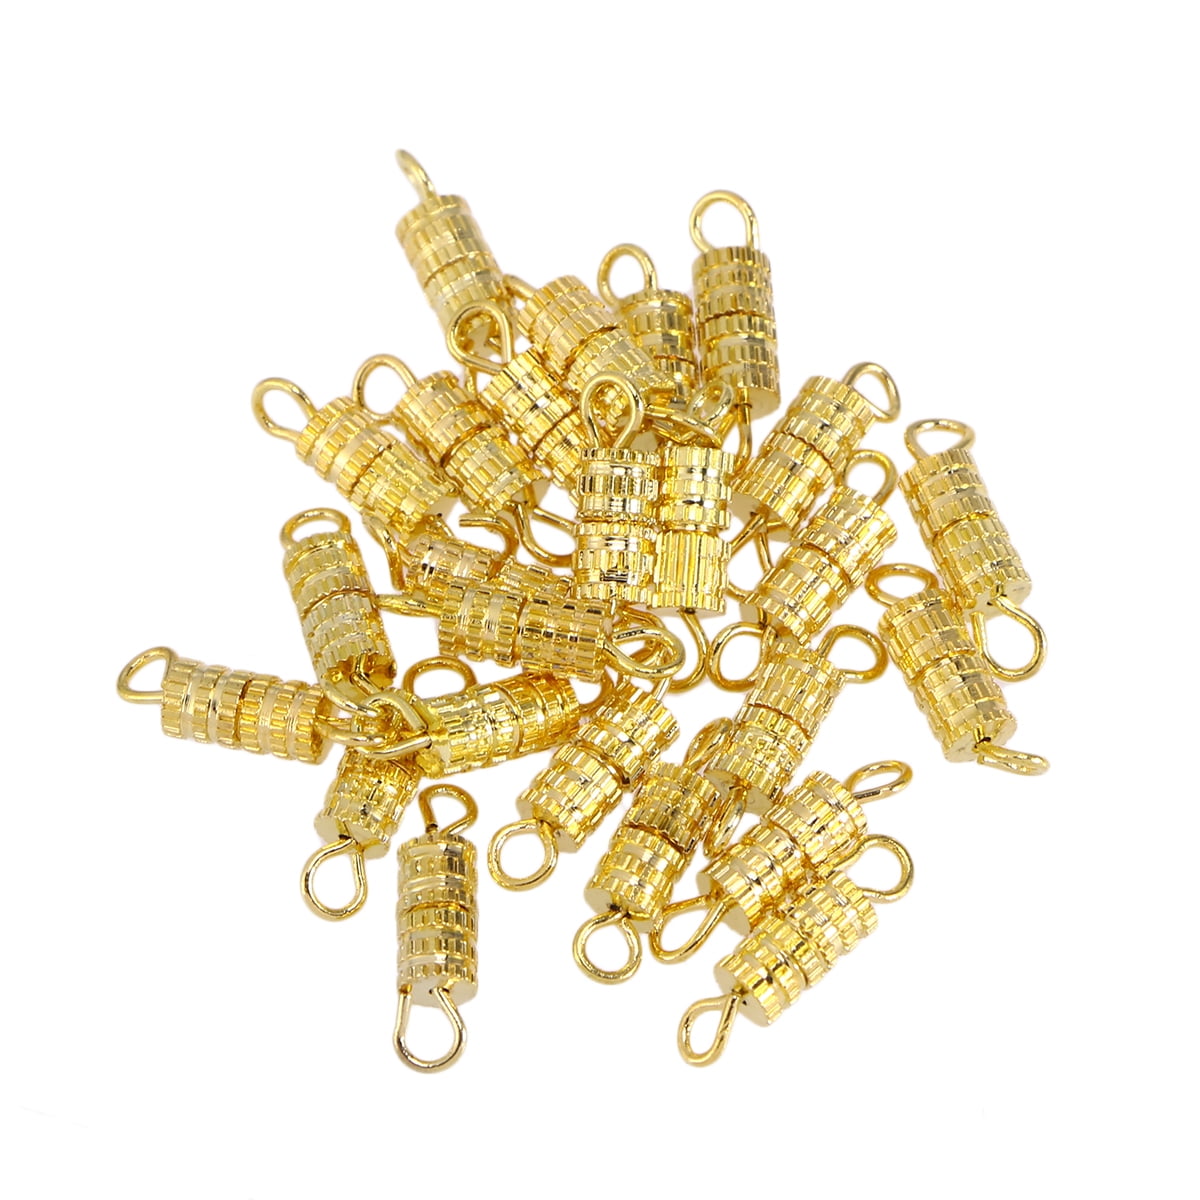 20pcs Gold & Silver Plated Jewelry Diy Screw Clasps buckle Necklace Connectors 